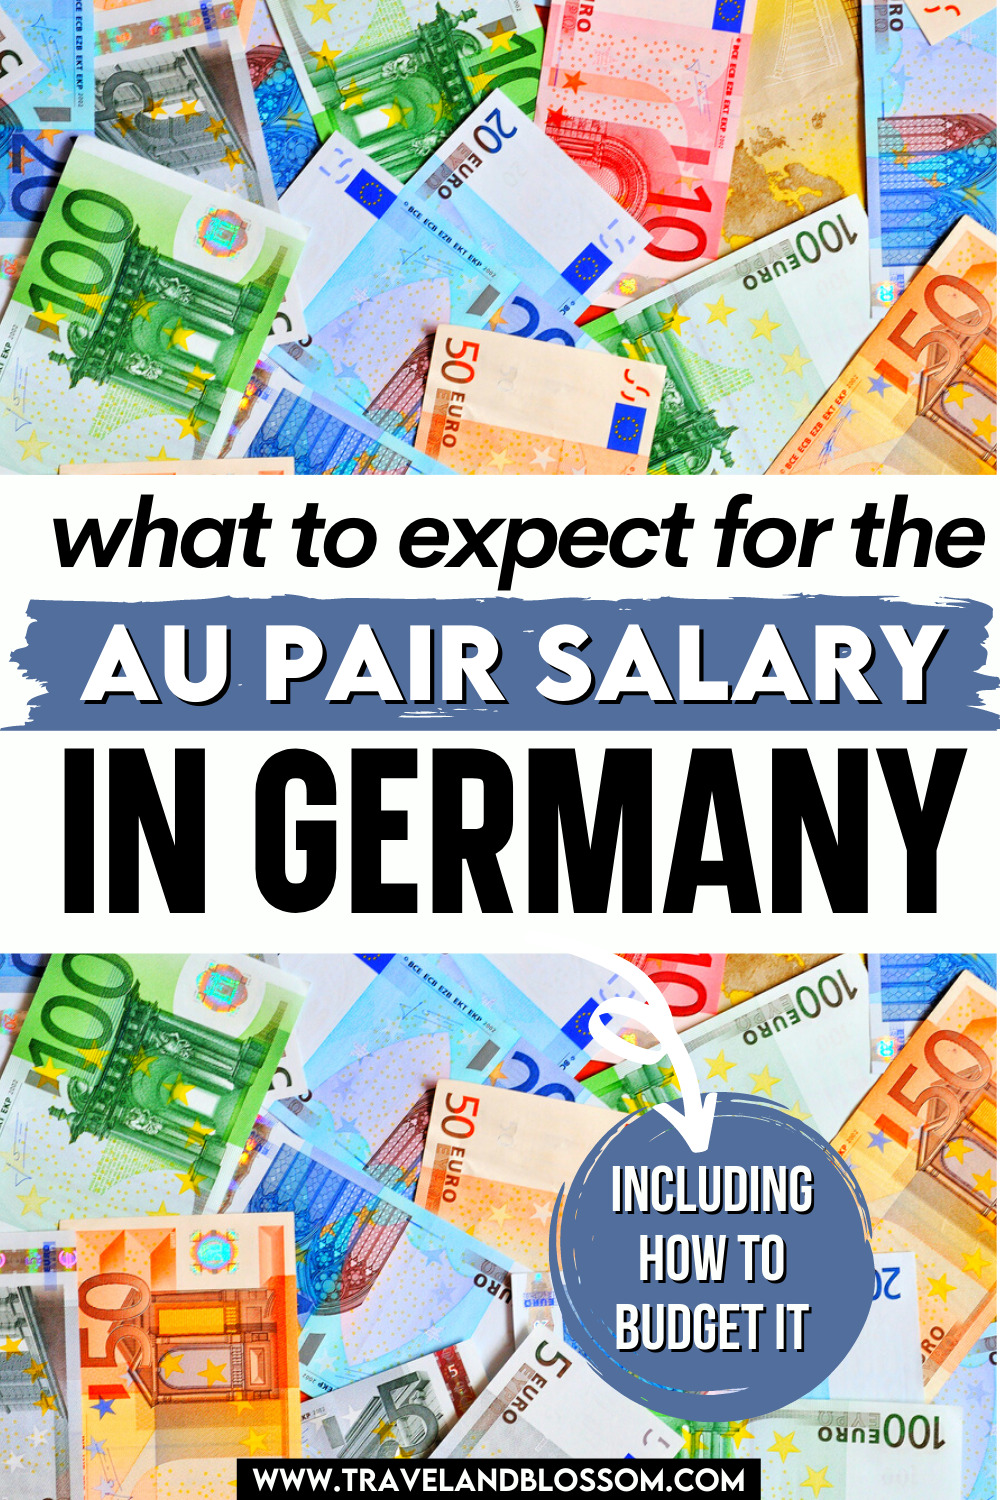 German Au Pair Salary: What to Expect